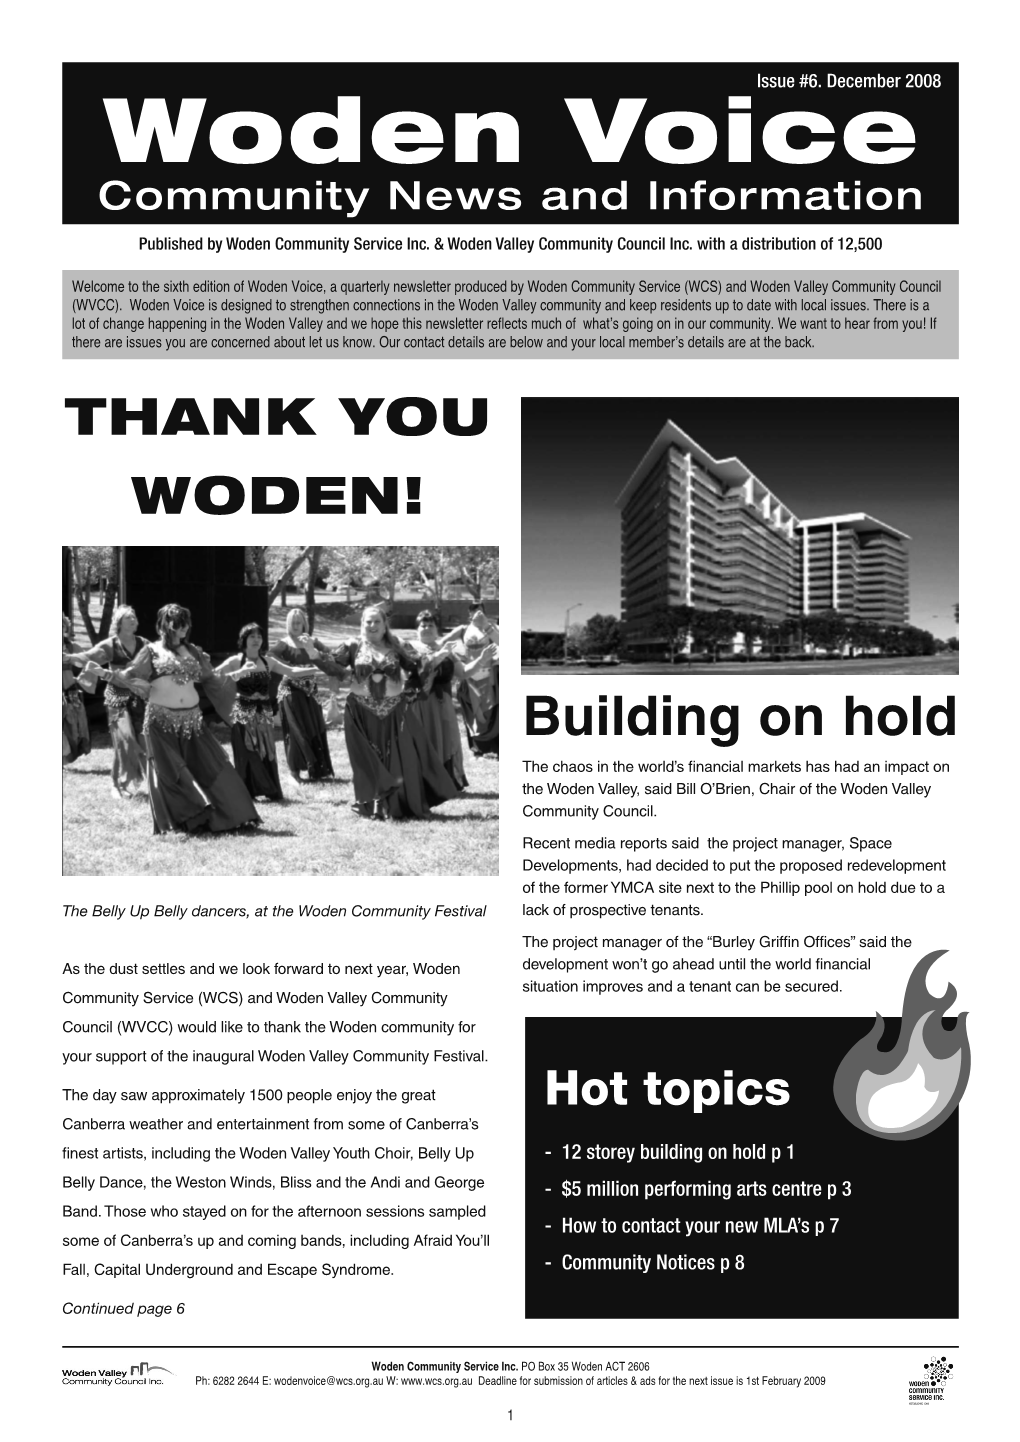 Woden Voice Community News and Information